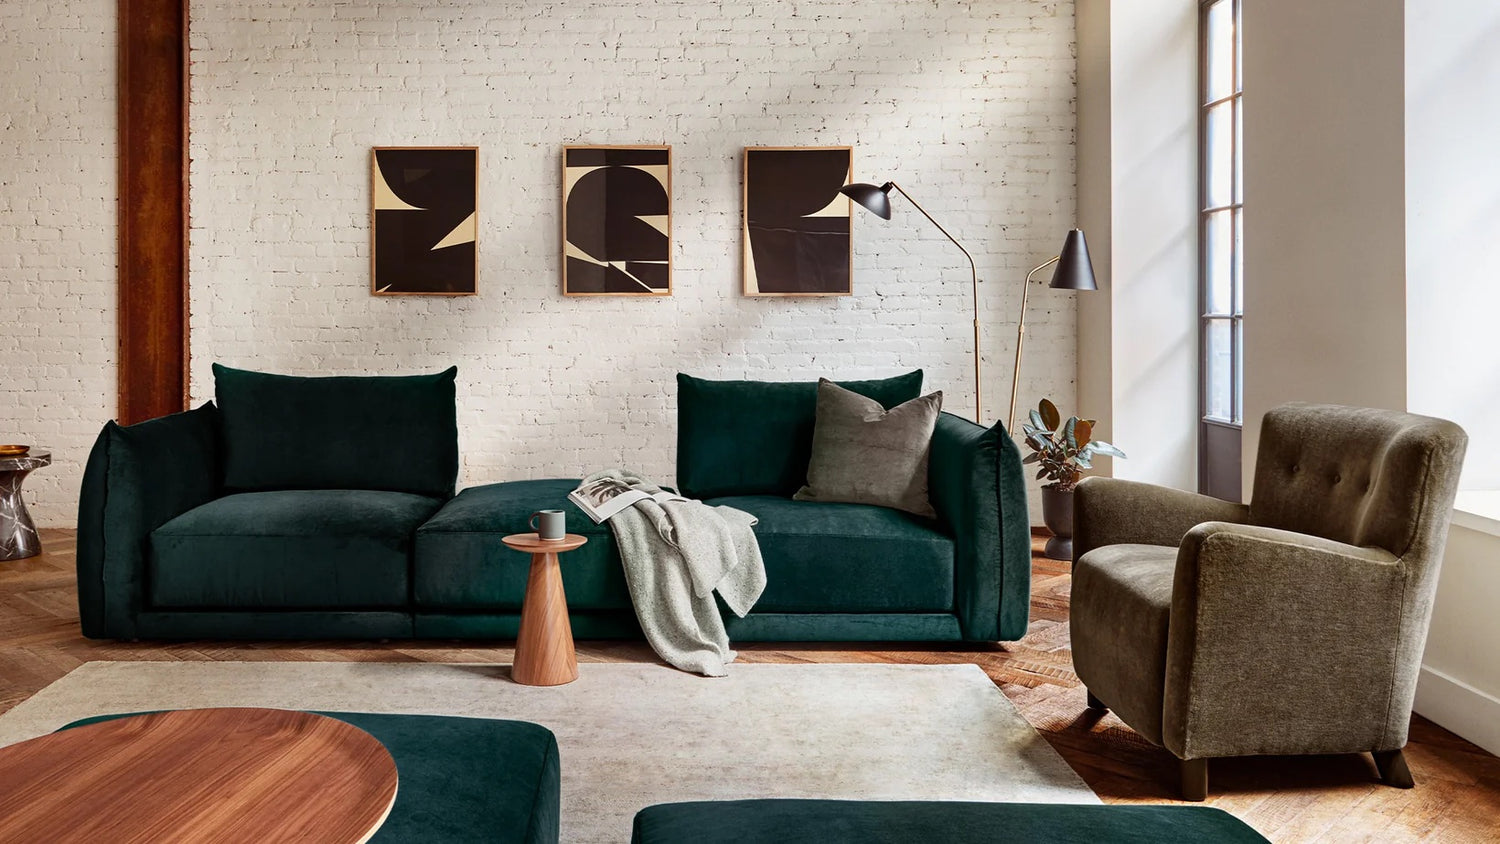 A modern living room with a dark green sofa, a gray armchair, a wooden side table with a magazine and a blanket on the sofa. Three abstract art pieces hang on a white brick wall, and a tall floor lamp stands next to the sofa. Sunlight streams through a window.